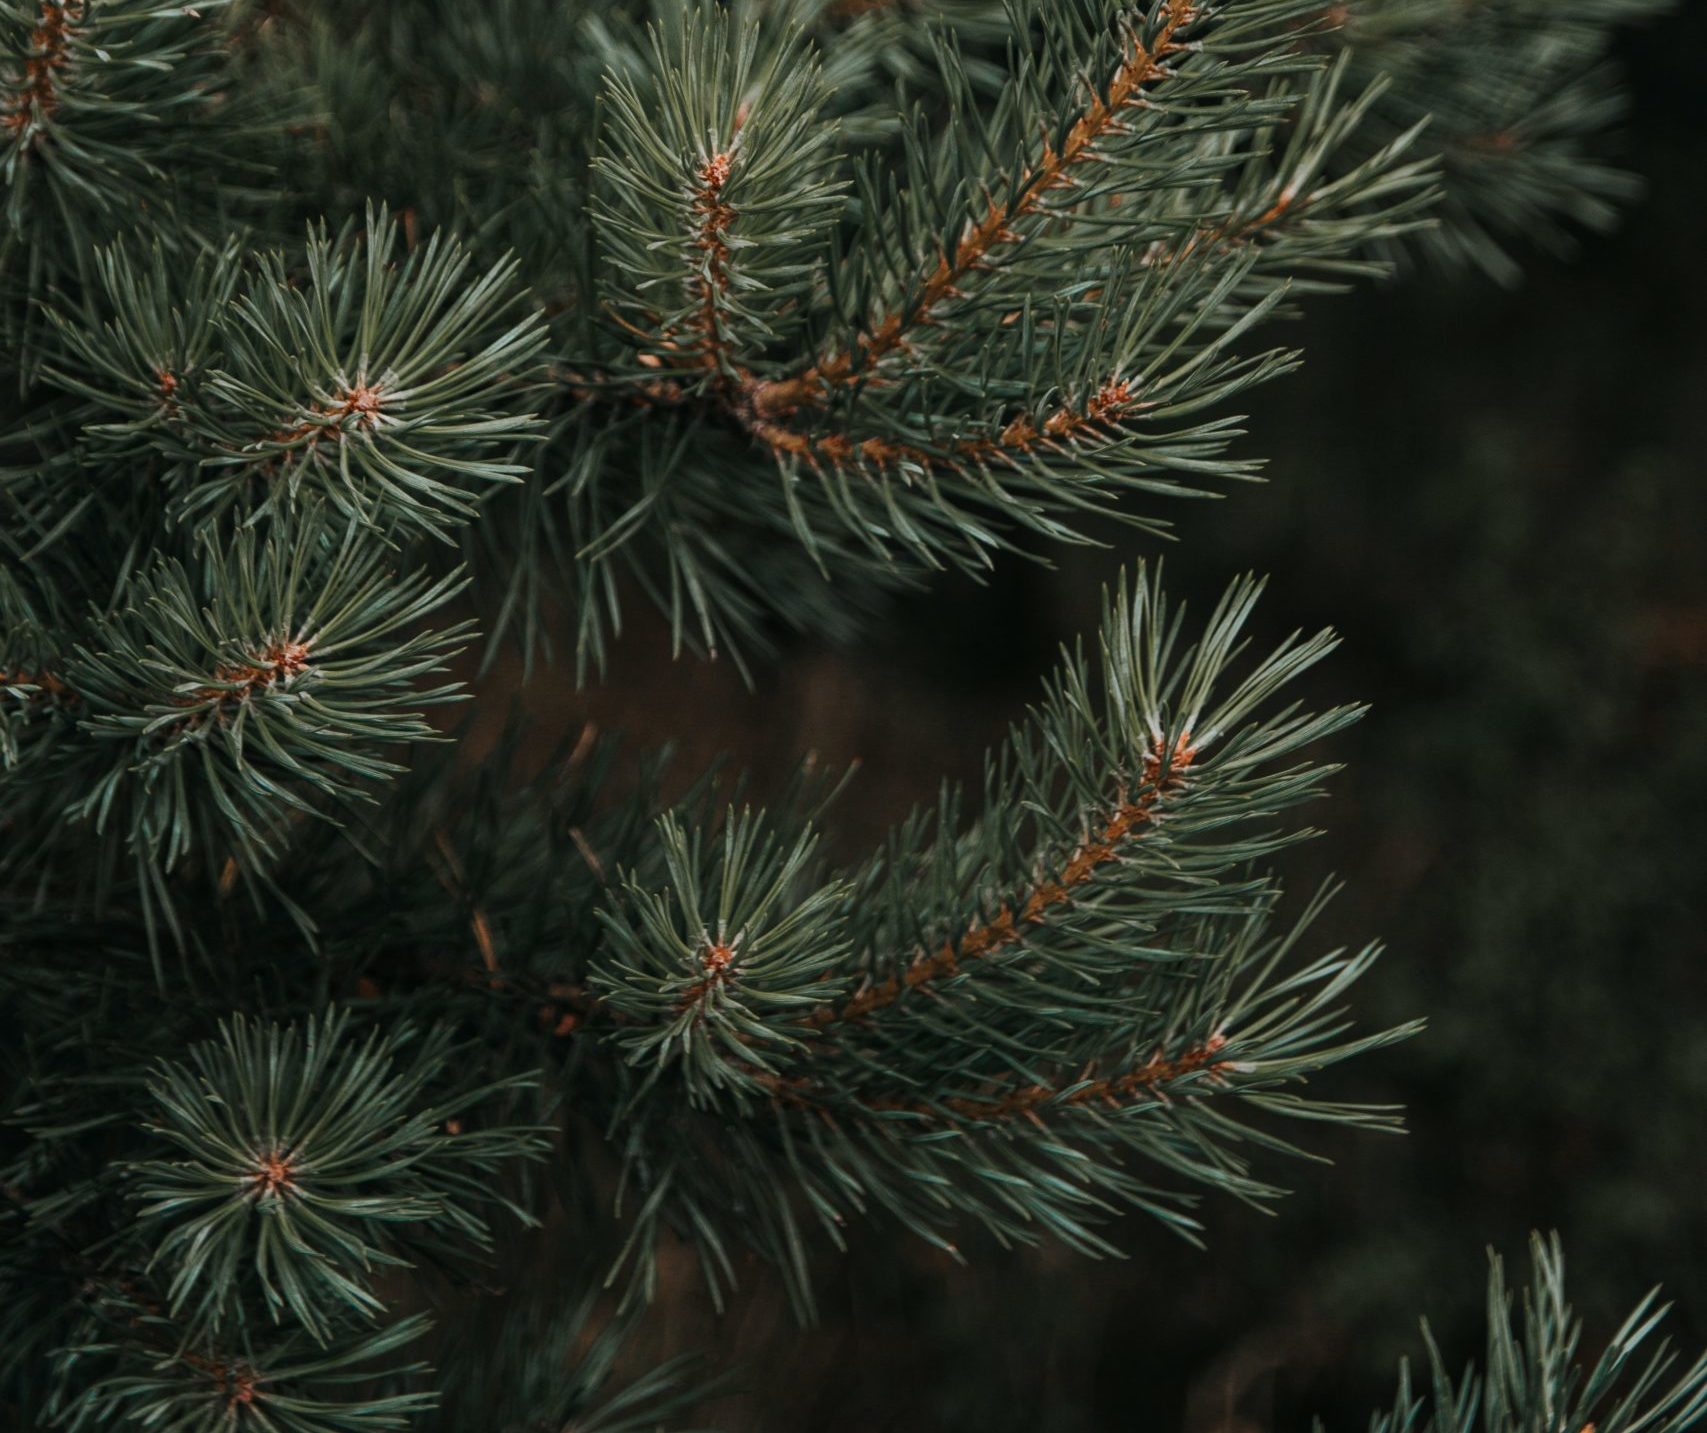 How to Have a (Sort of) Sustainable Holiday Season